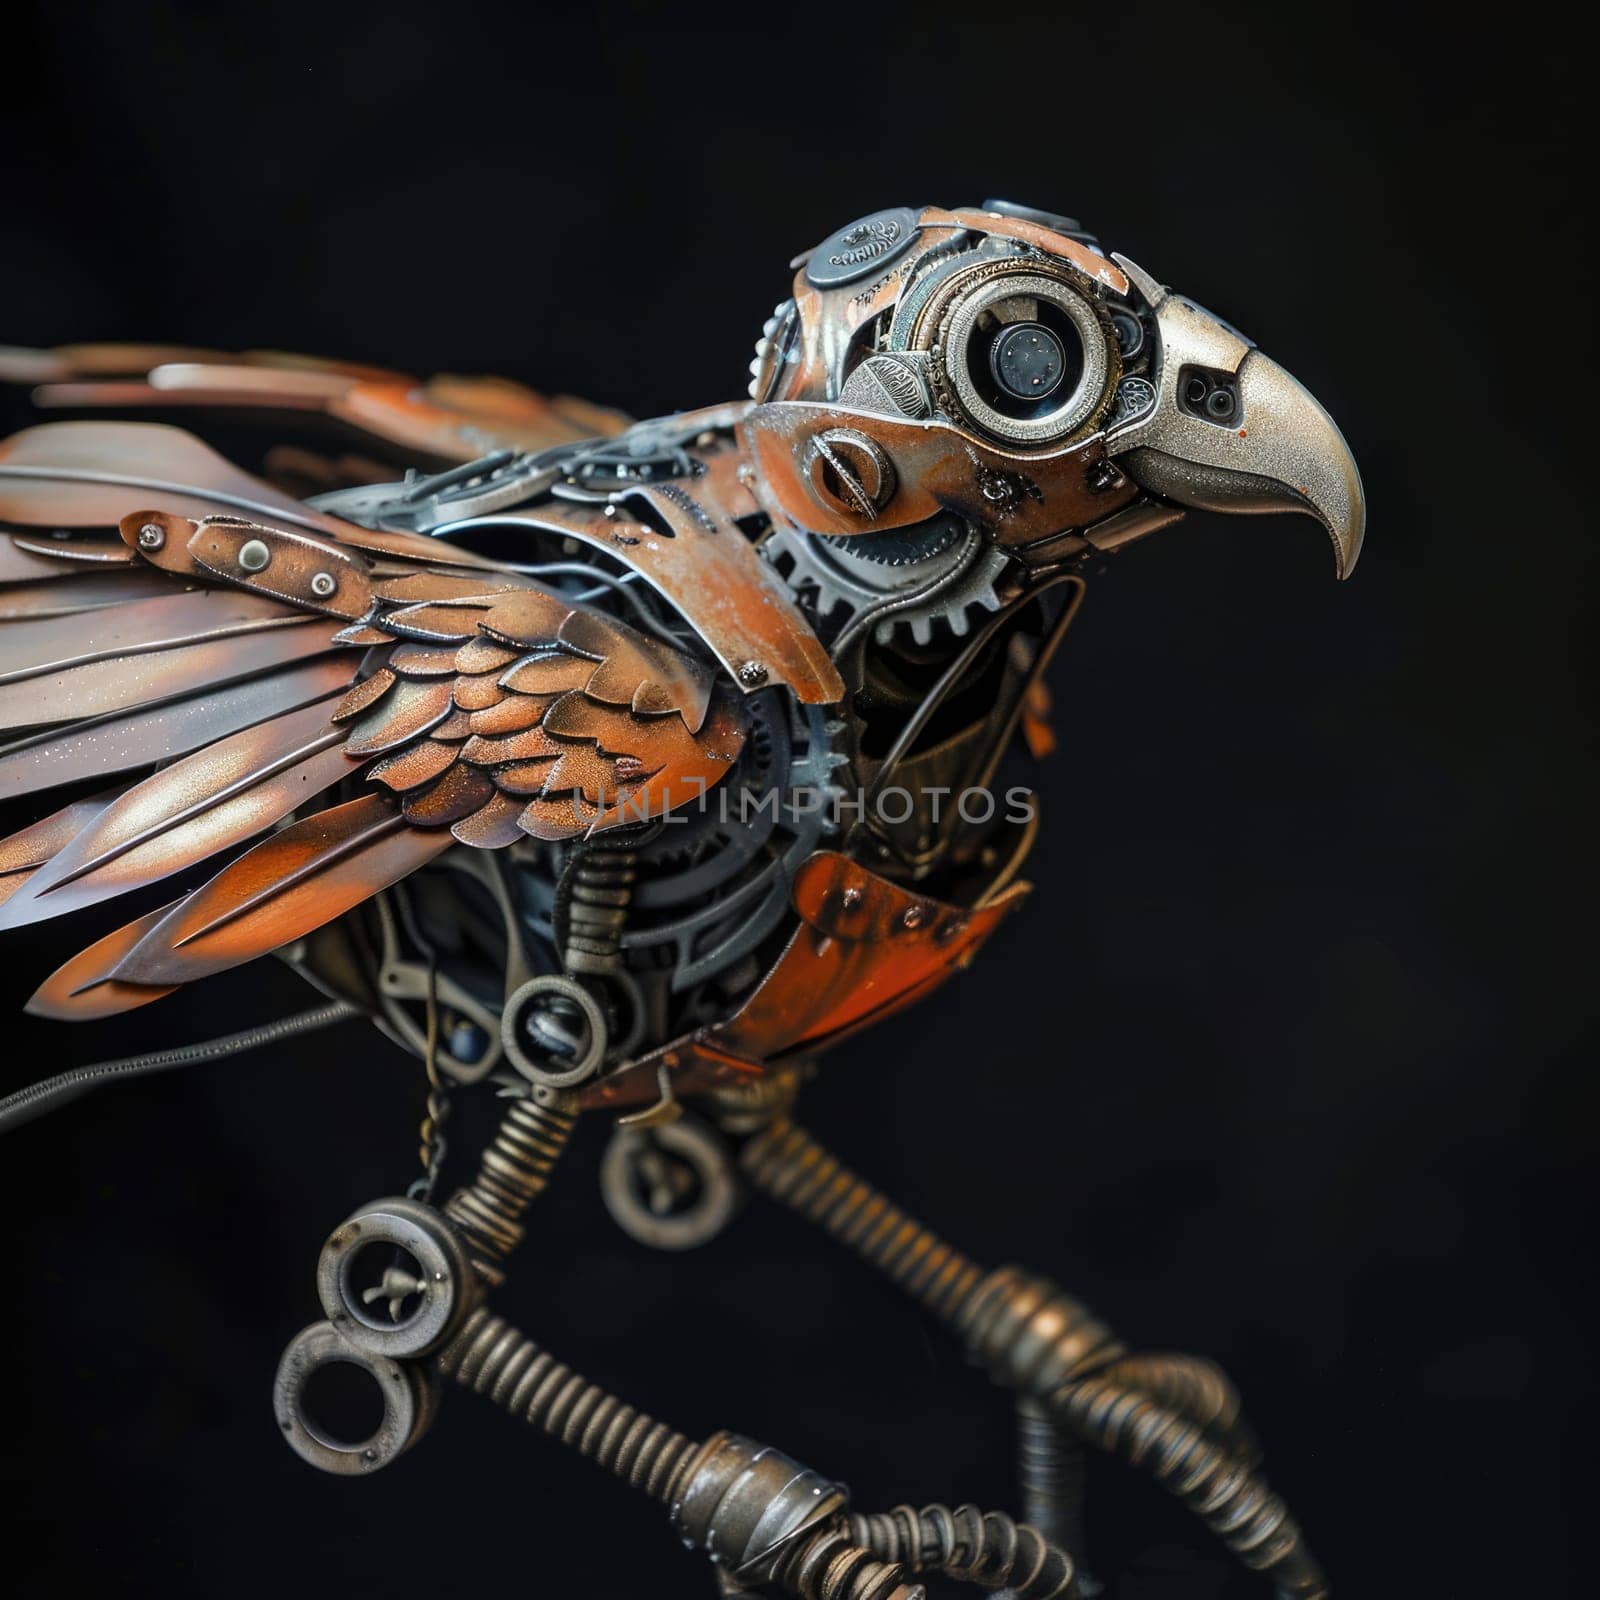 Sculpture of a eagle bird made out of metal pieces, with a shiny beak and detailed wings AI